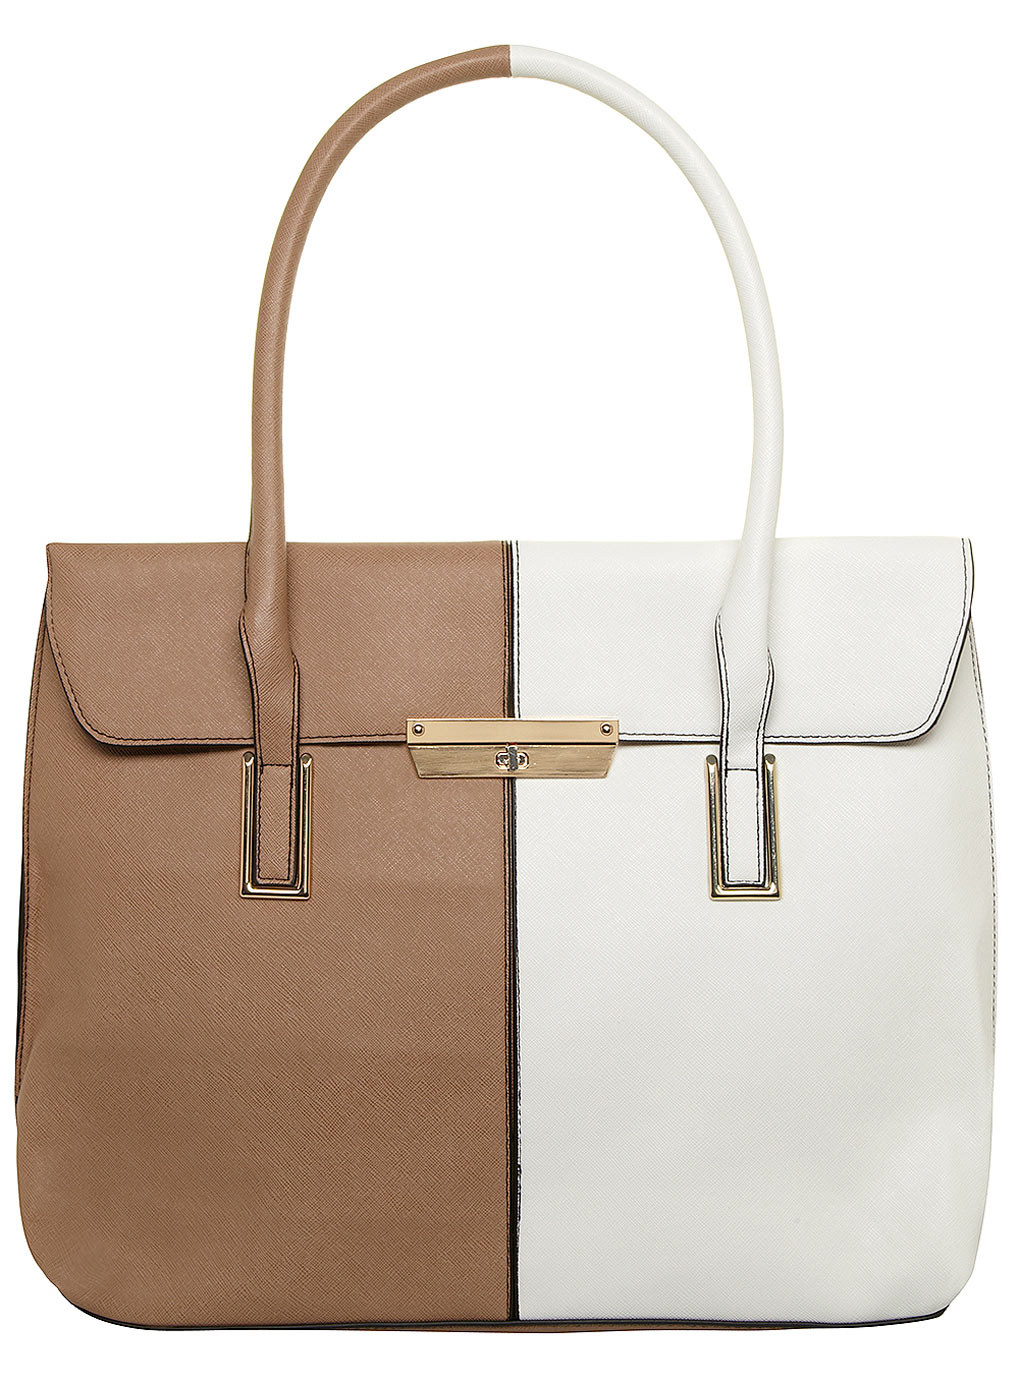 Dorothy Perkins Camel and white music bag 18346032